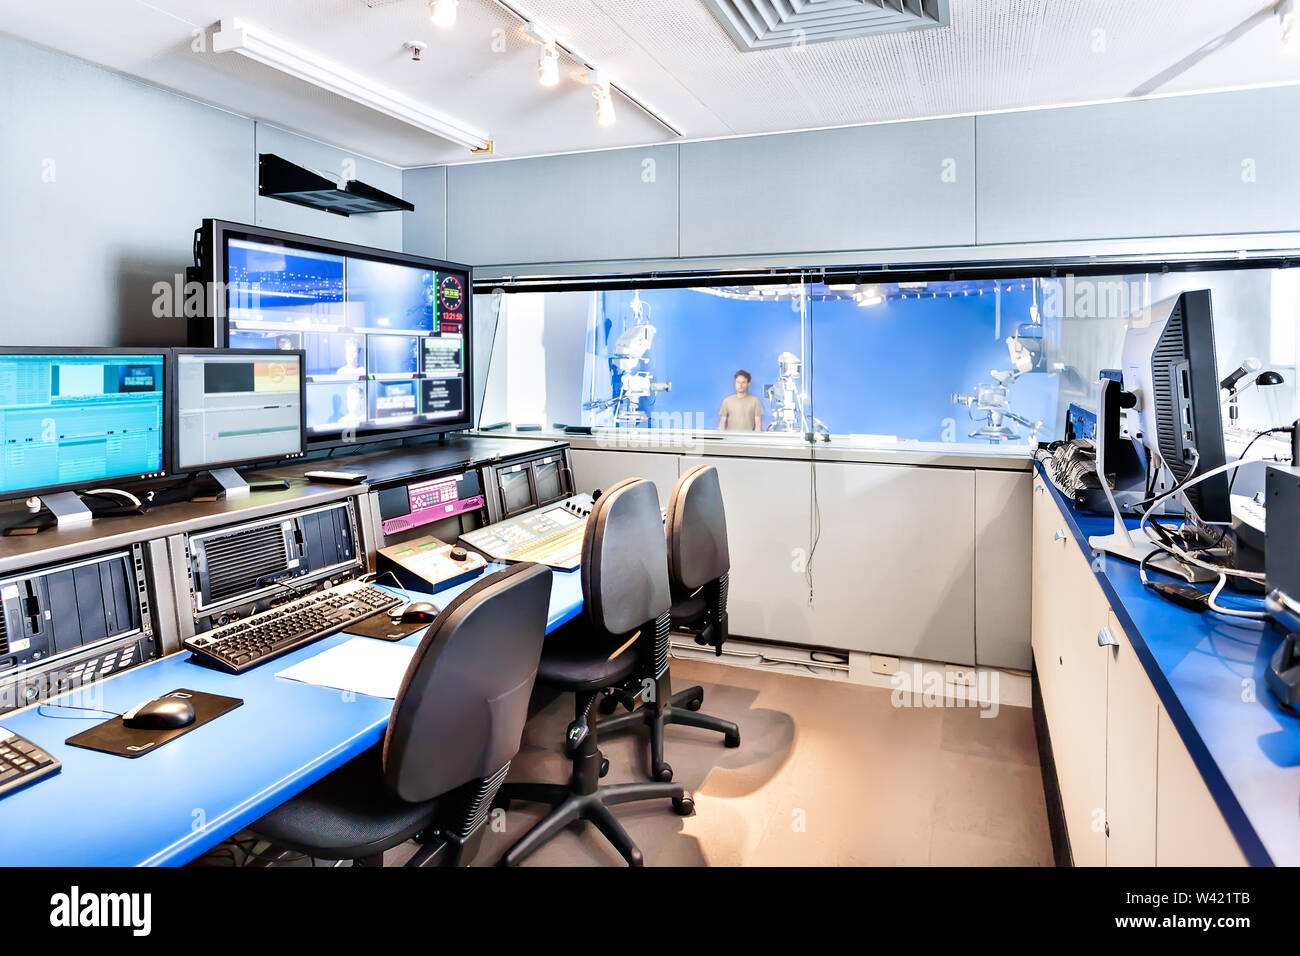 Broadcasting studio with screens and other editing equipment with no people ready to start broadcasting from the outside room with cameras Stock Photo